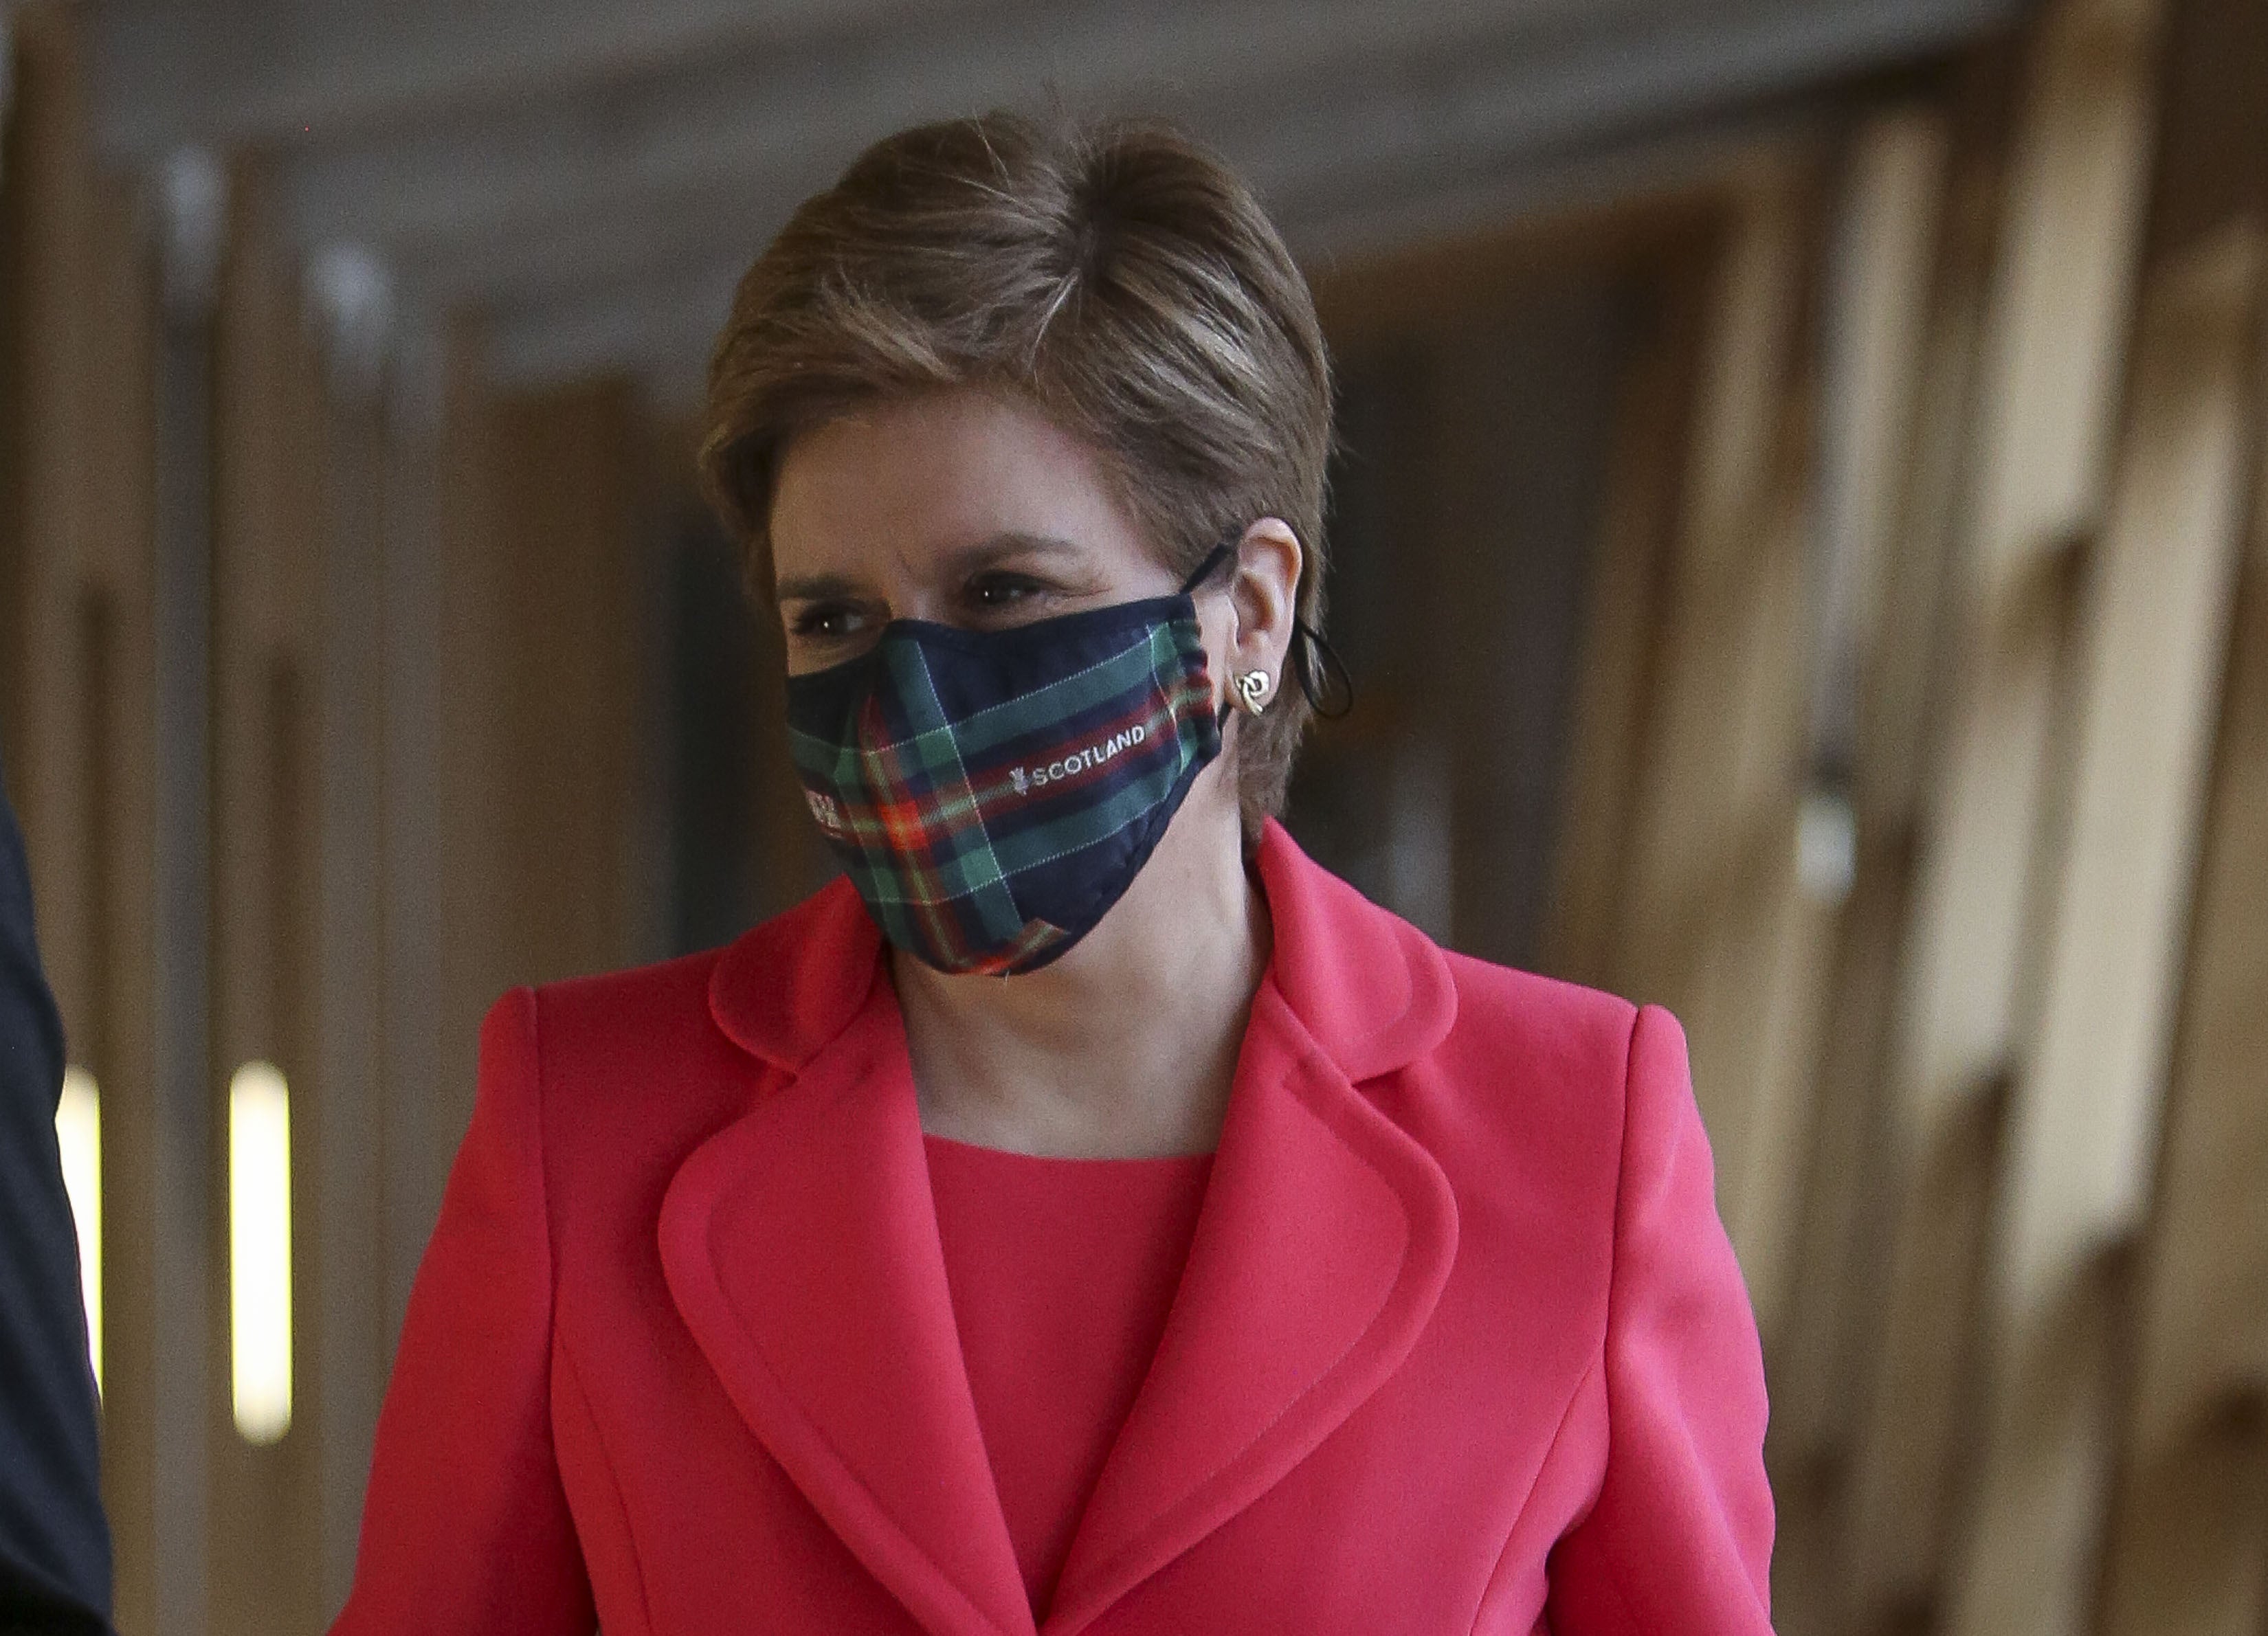 Nicola Sturgeon won praise for her calm communication style during the Covid crisis